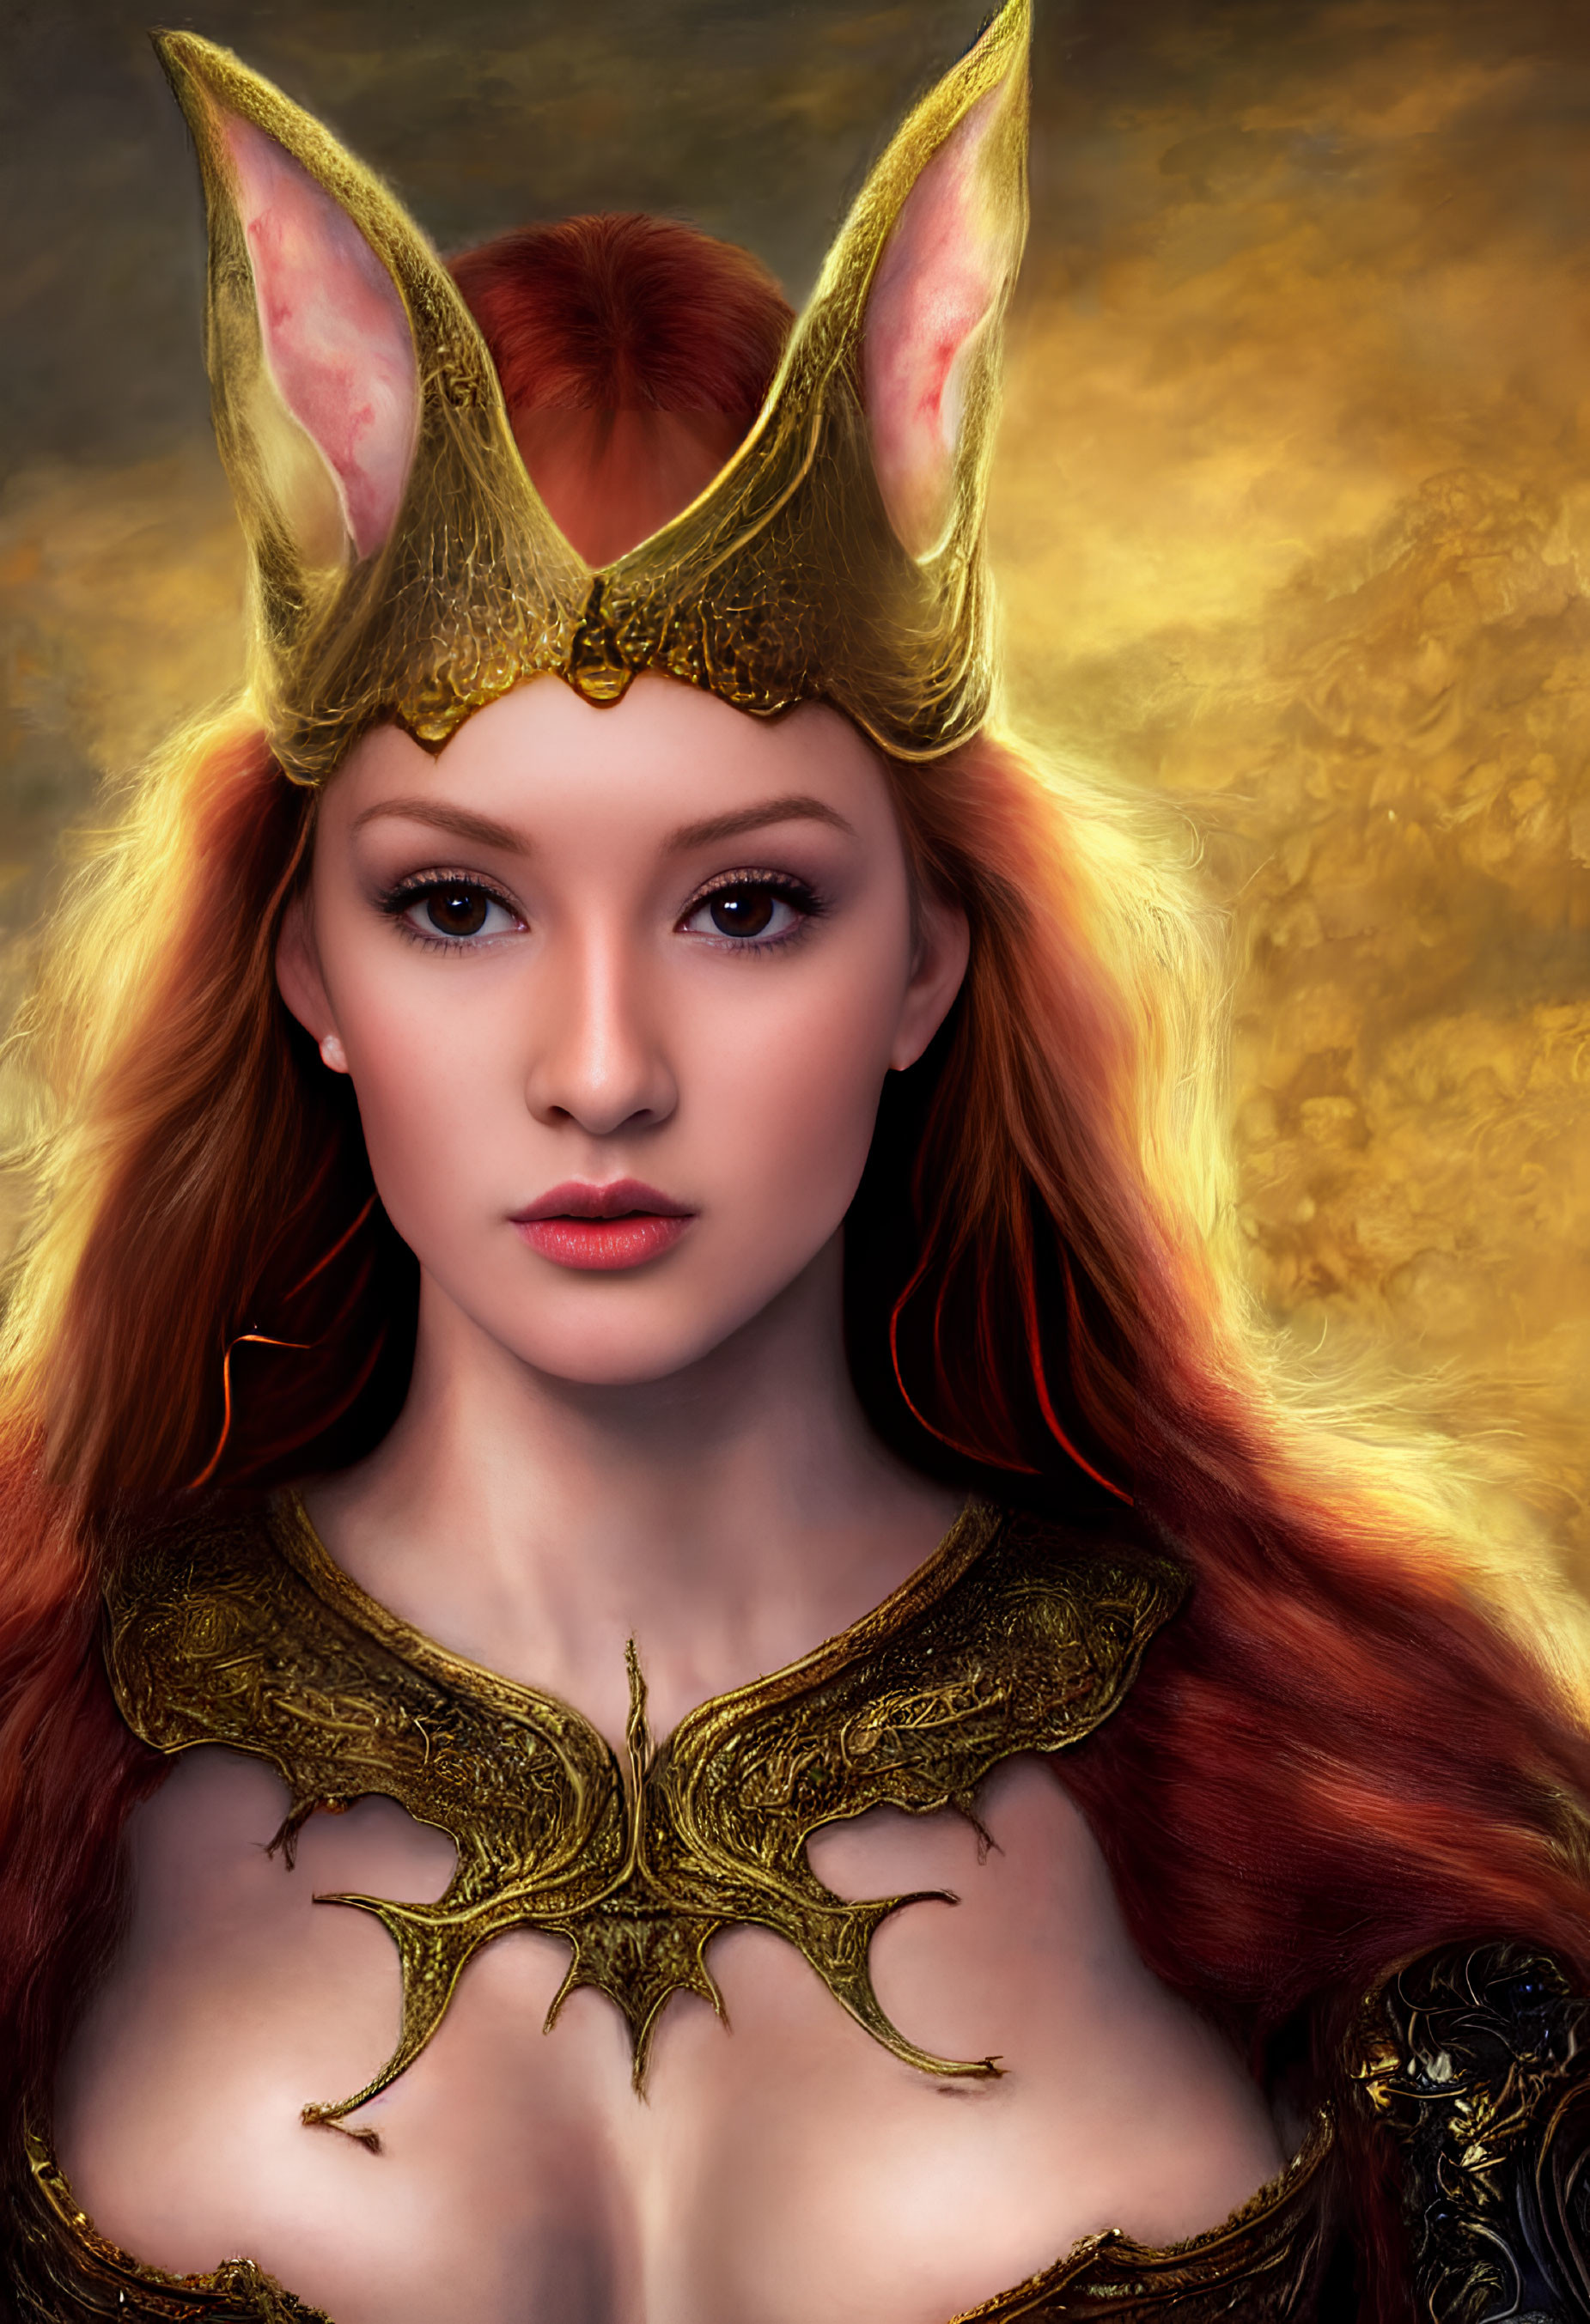 Digital artwork of a woman with red hair in ornate armor and golden crown against warm backdrop